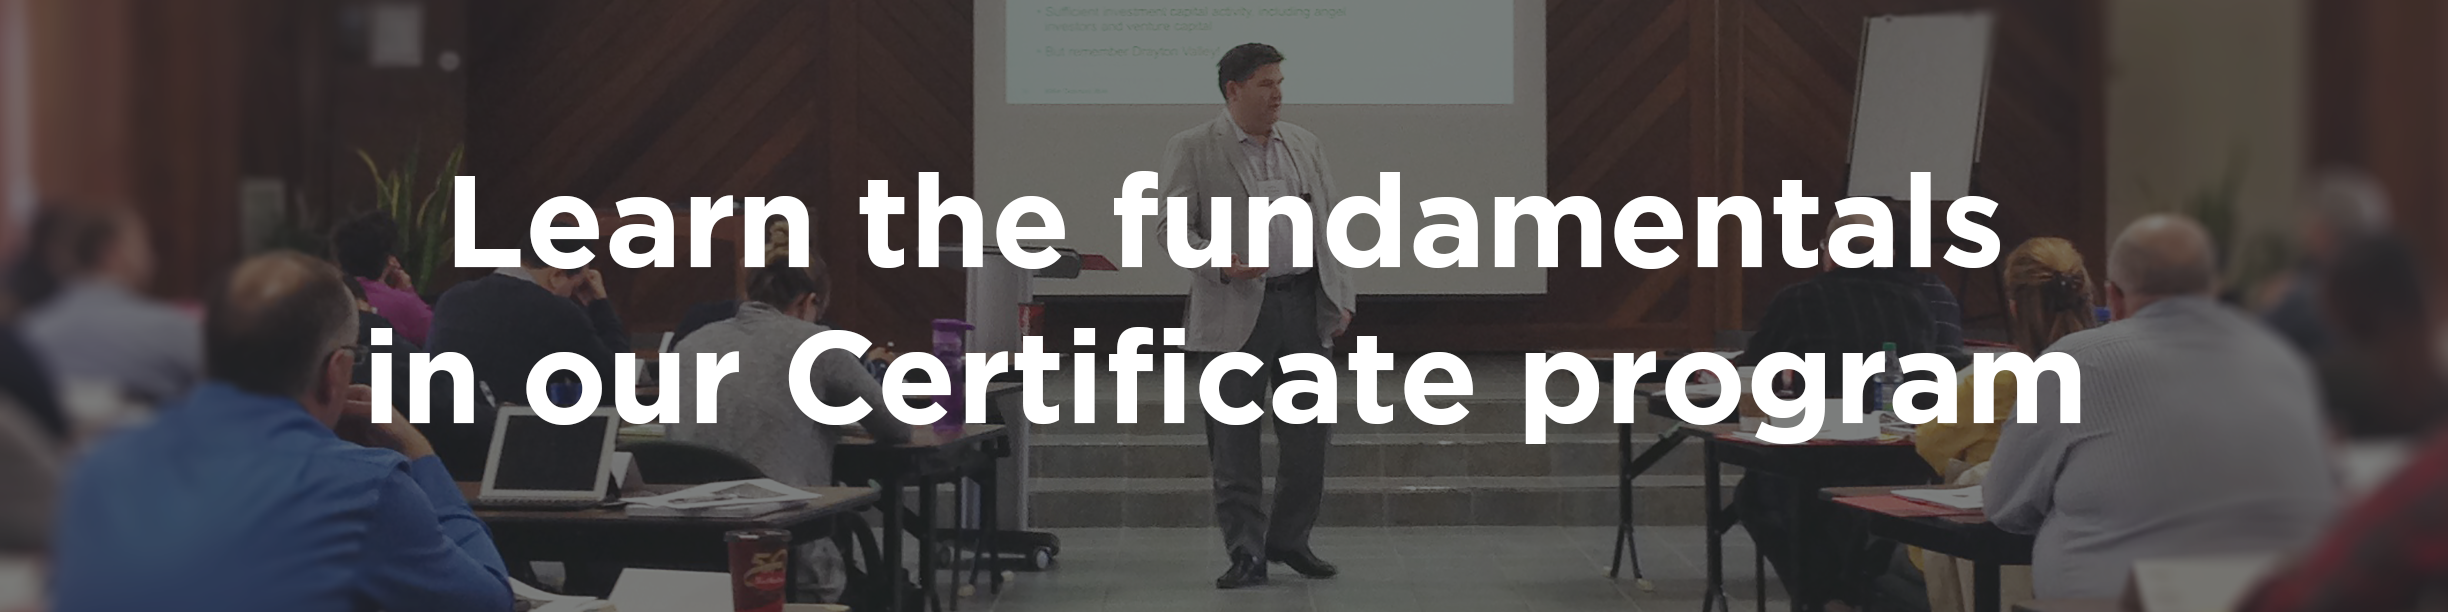 Learn the fundamentals in our certificate program (button).